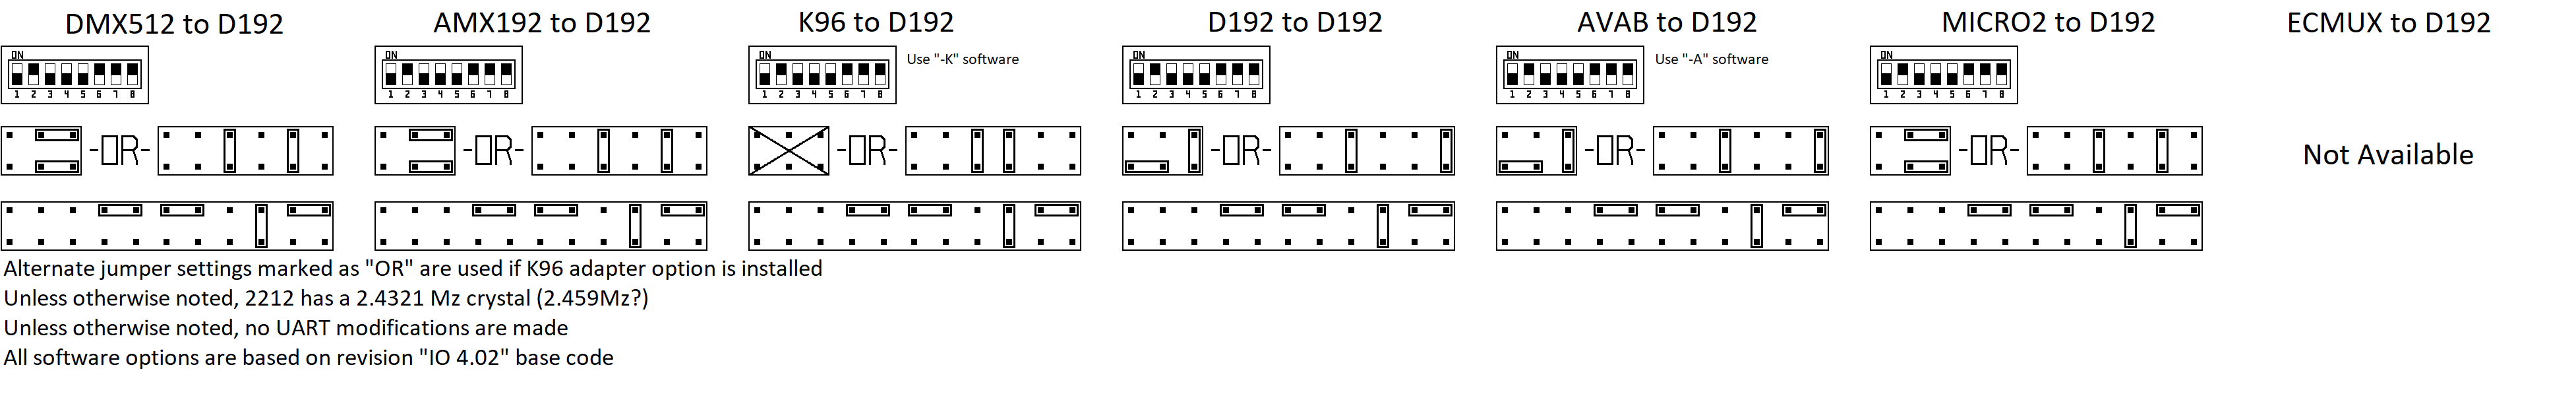 RD2031 Input to D192.png